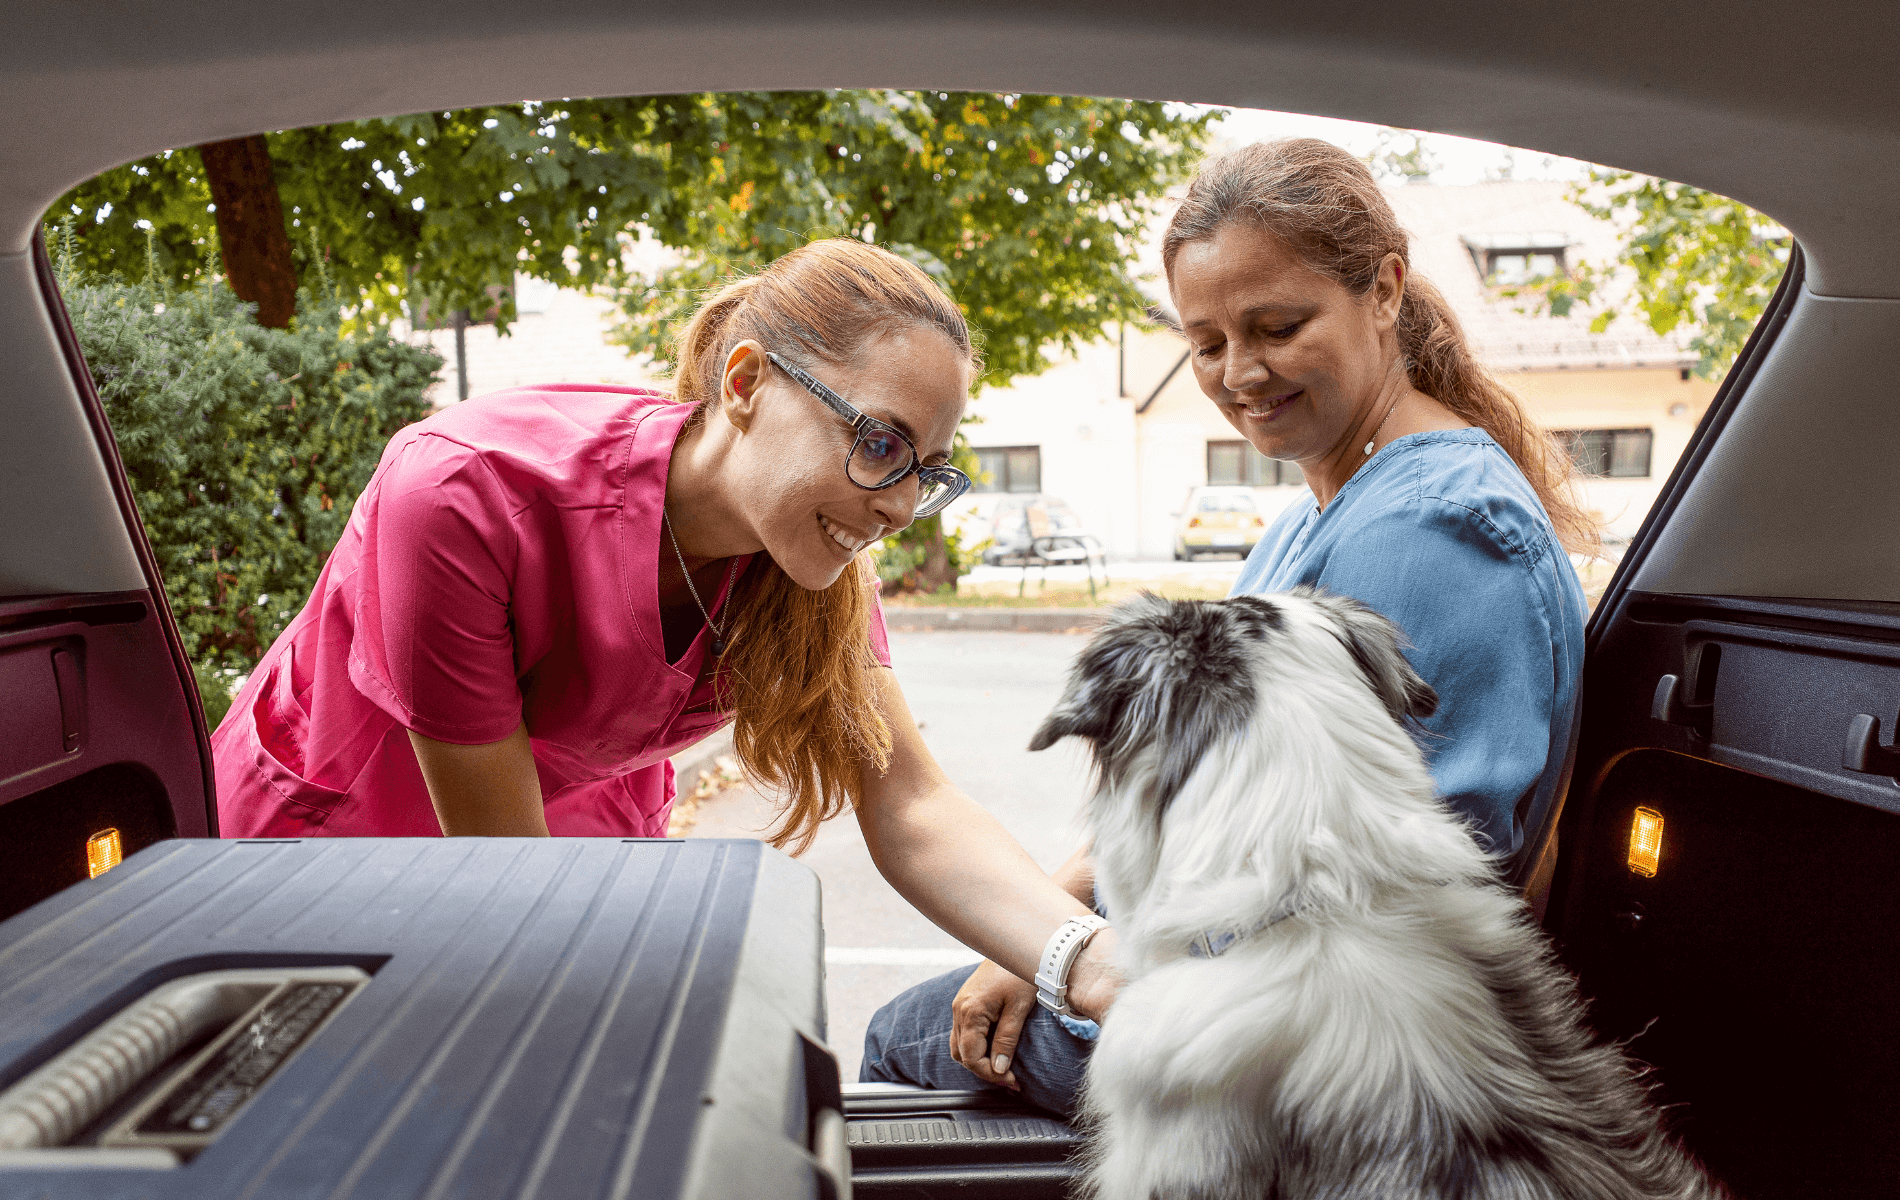 A person petting a dog in a car